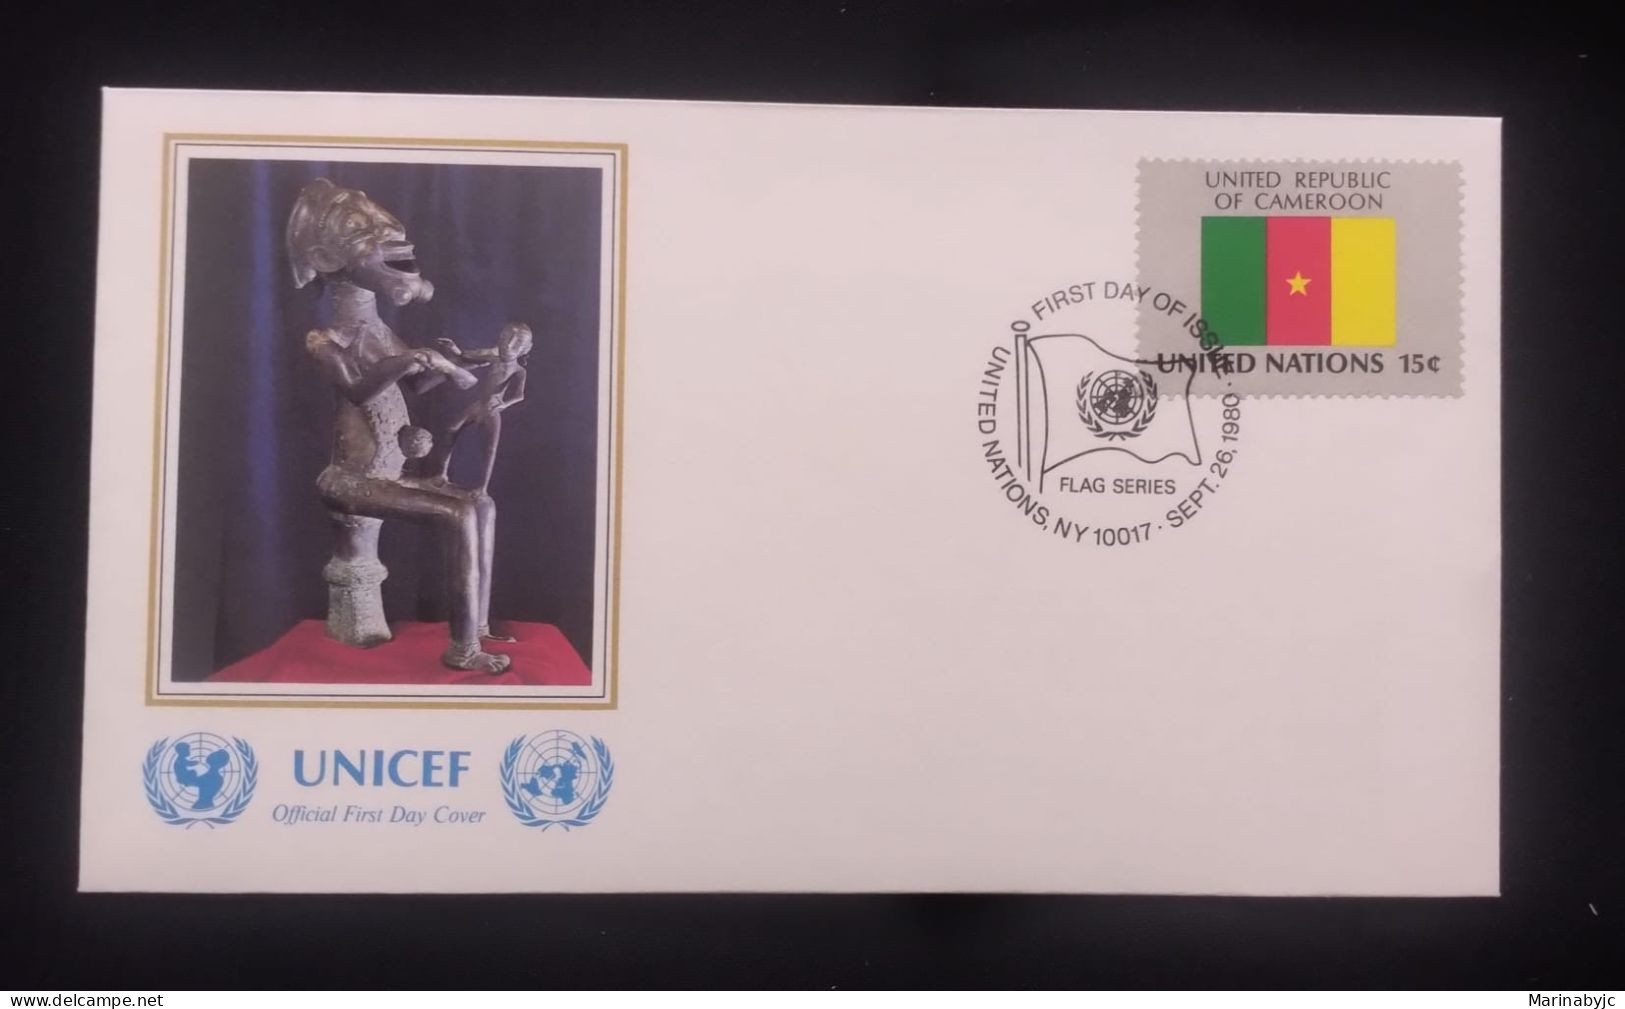 EL)1980 UNITED NATIONS, NATIONAL FLAG OF THE MEMBER COUNTRIES, CAMEROON, UNICEF, ARCHEOLOGY, FDC - Unused Stamps